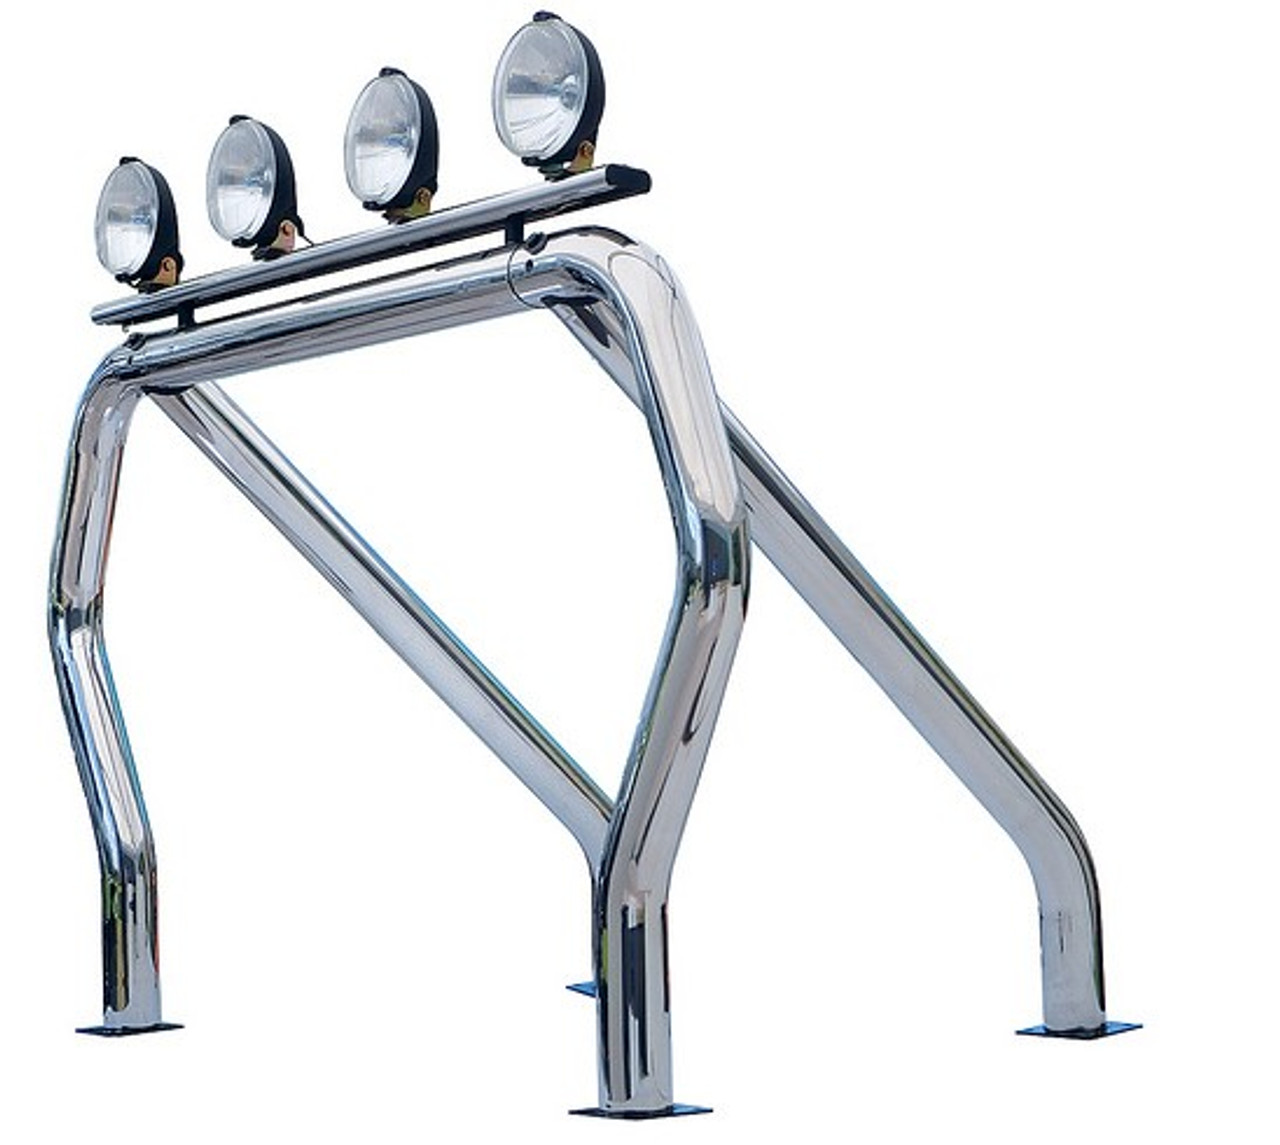 Go Rhino 9009560SSS RAM 2500/3500, 2010-2021, RHINO Bed Bar, Roll Bar - Complete kit: Main bar + Kickers, Polished Stainless Steel, Mounting Kit Included